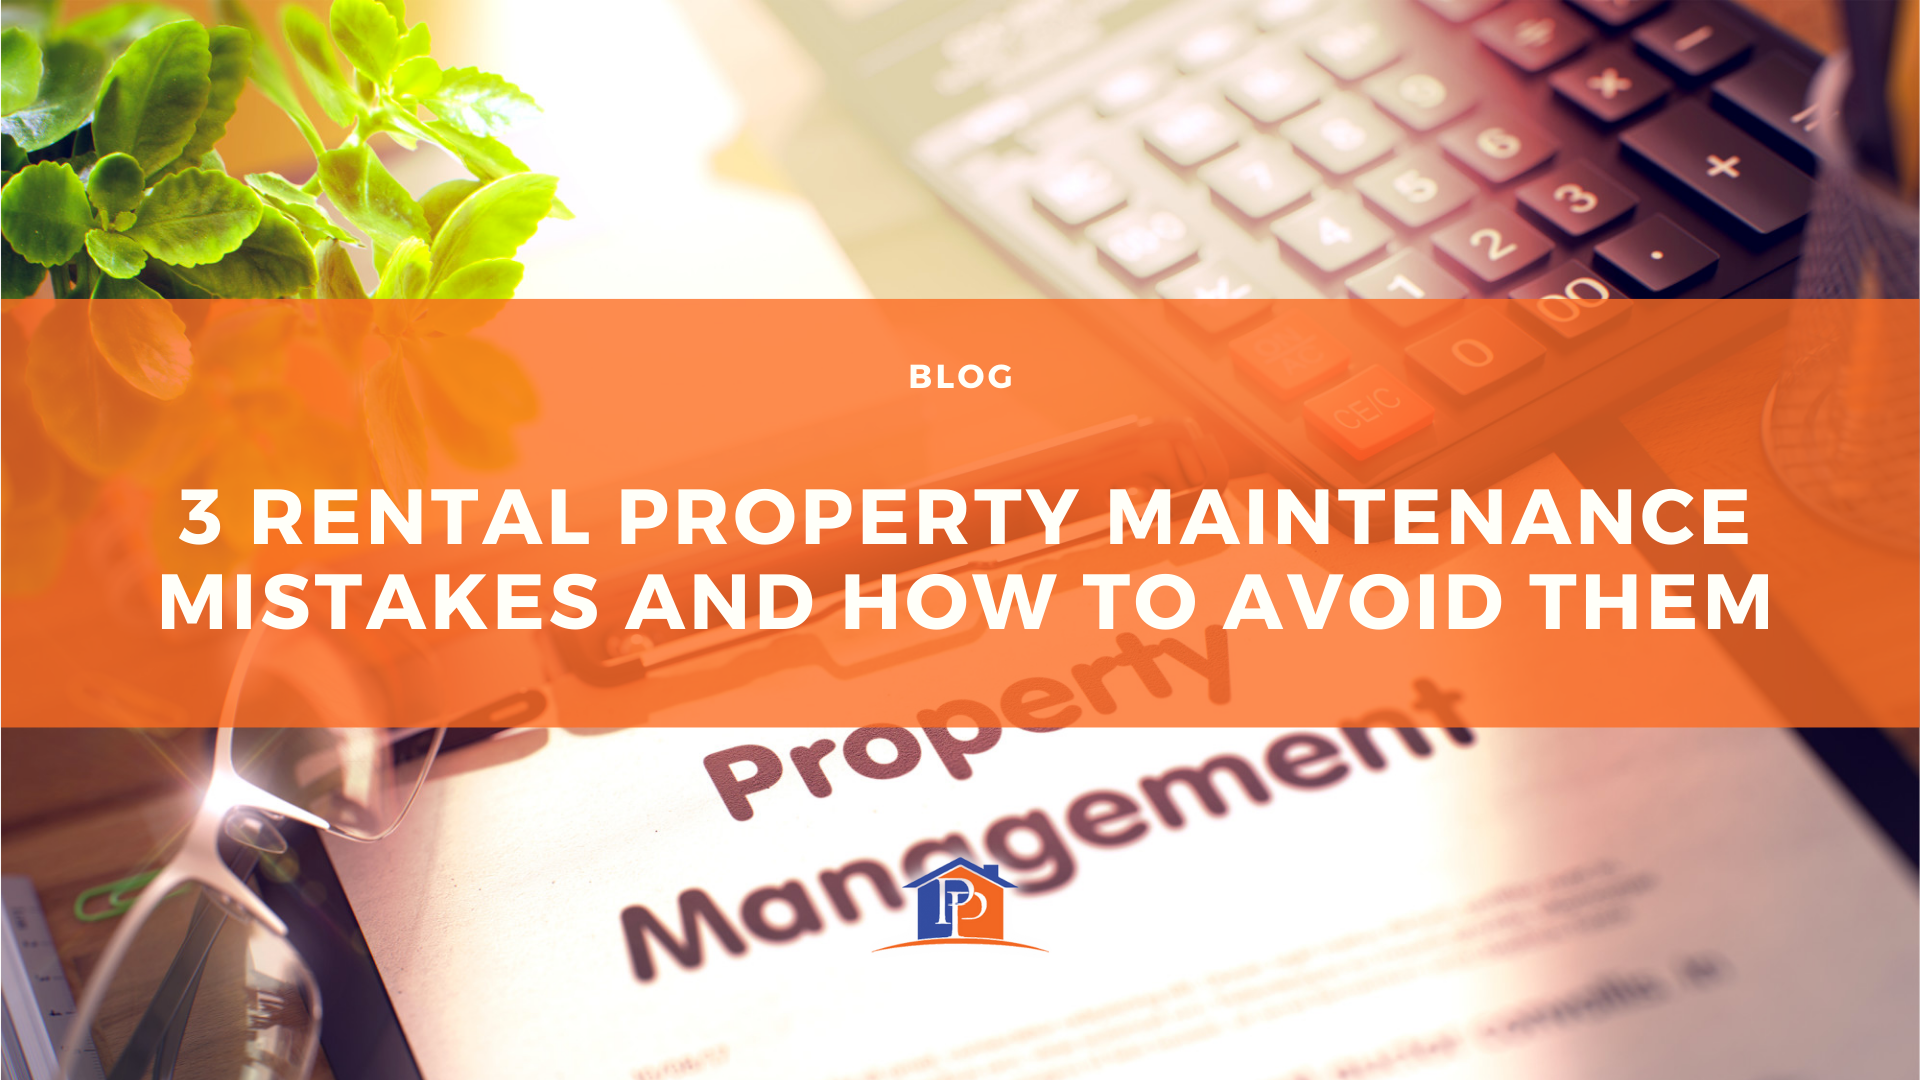 3 Rental Property Maintenance Mistakes and How to Avoid Them